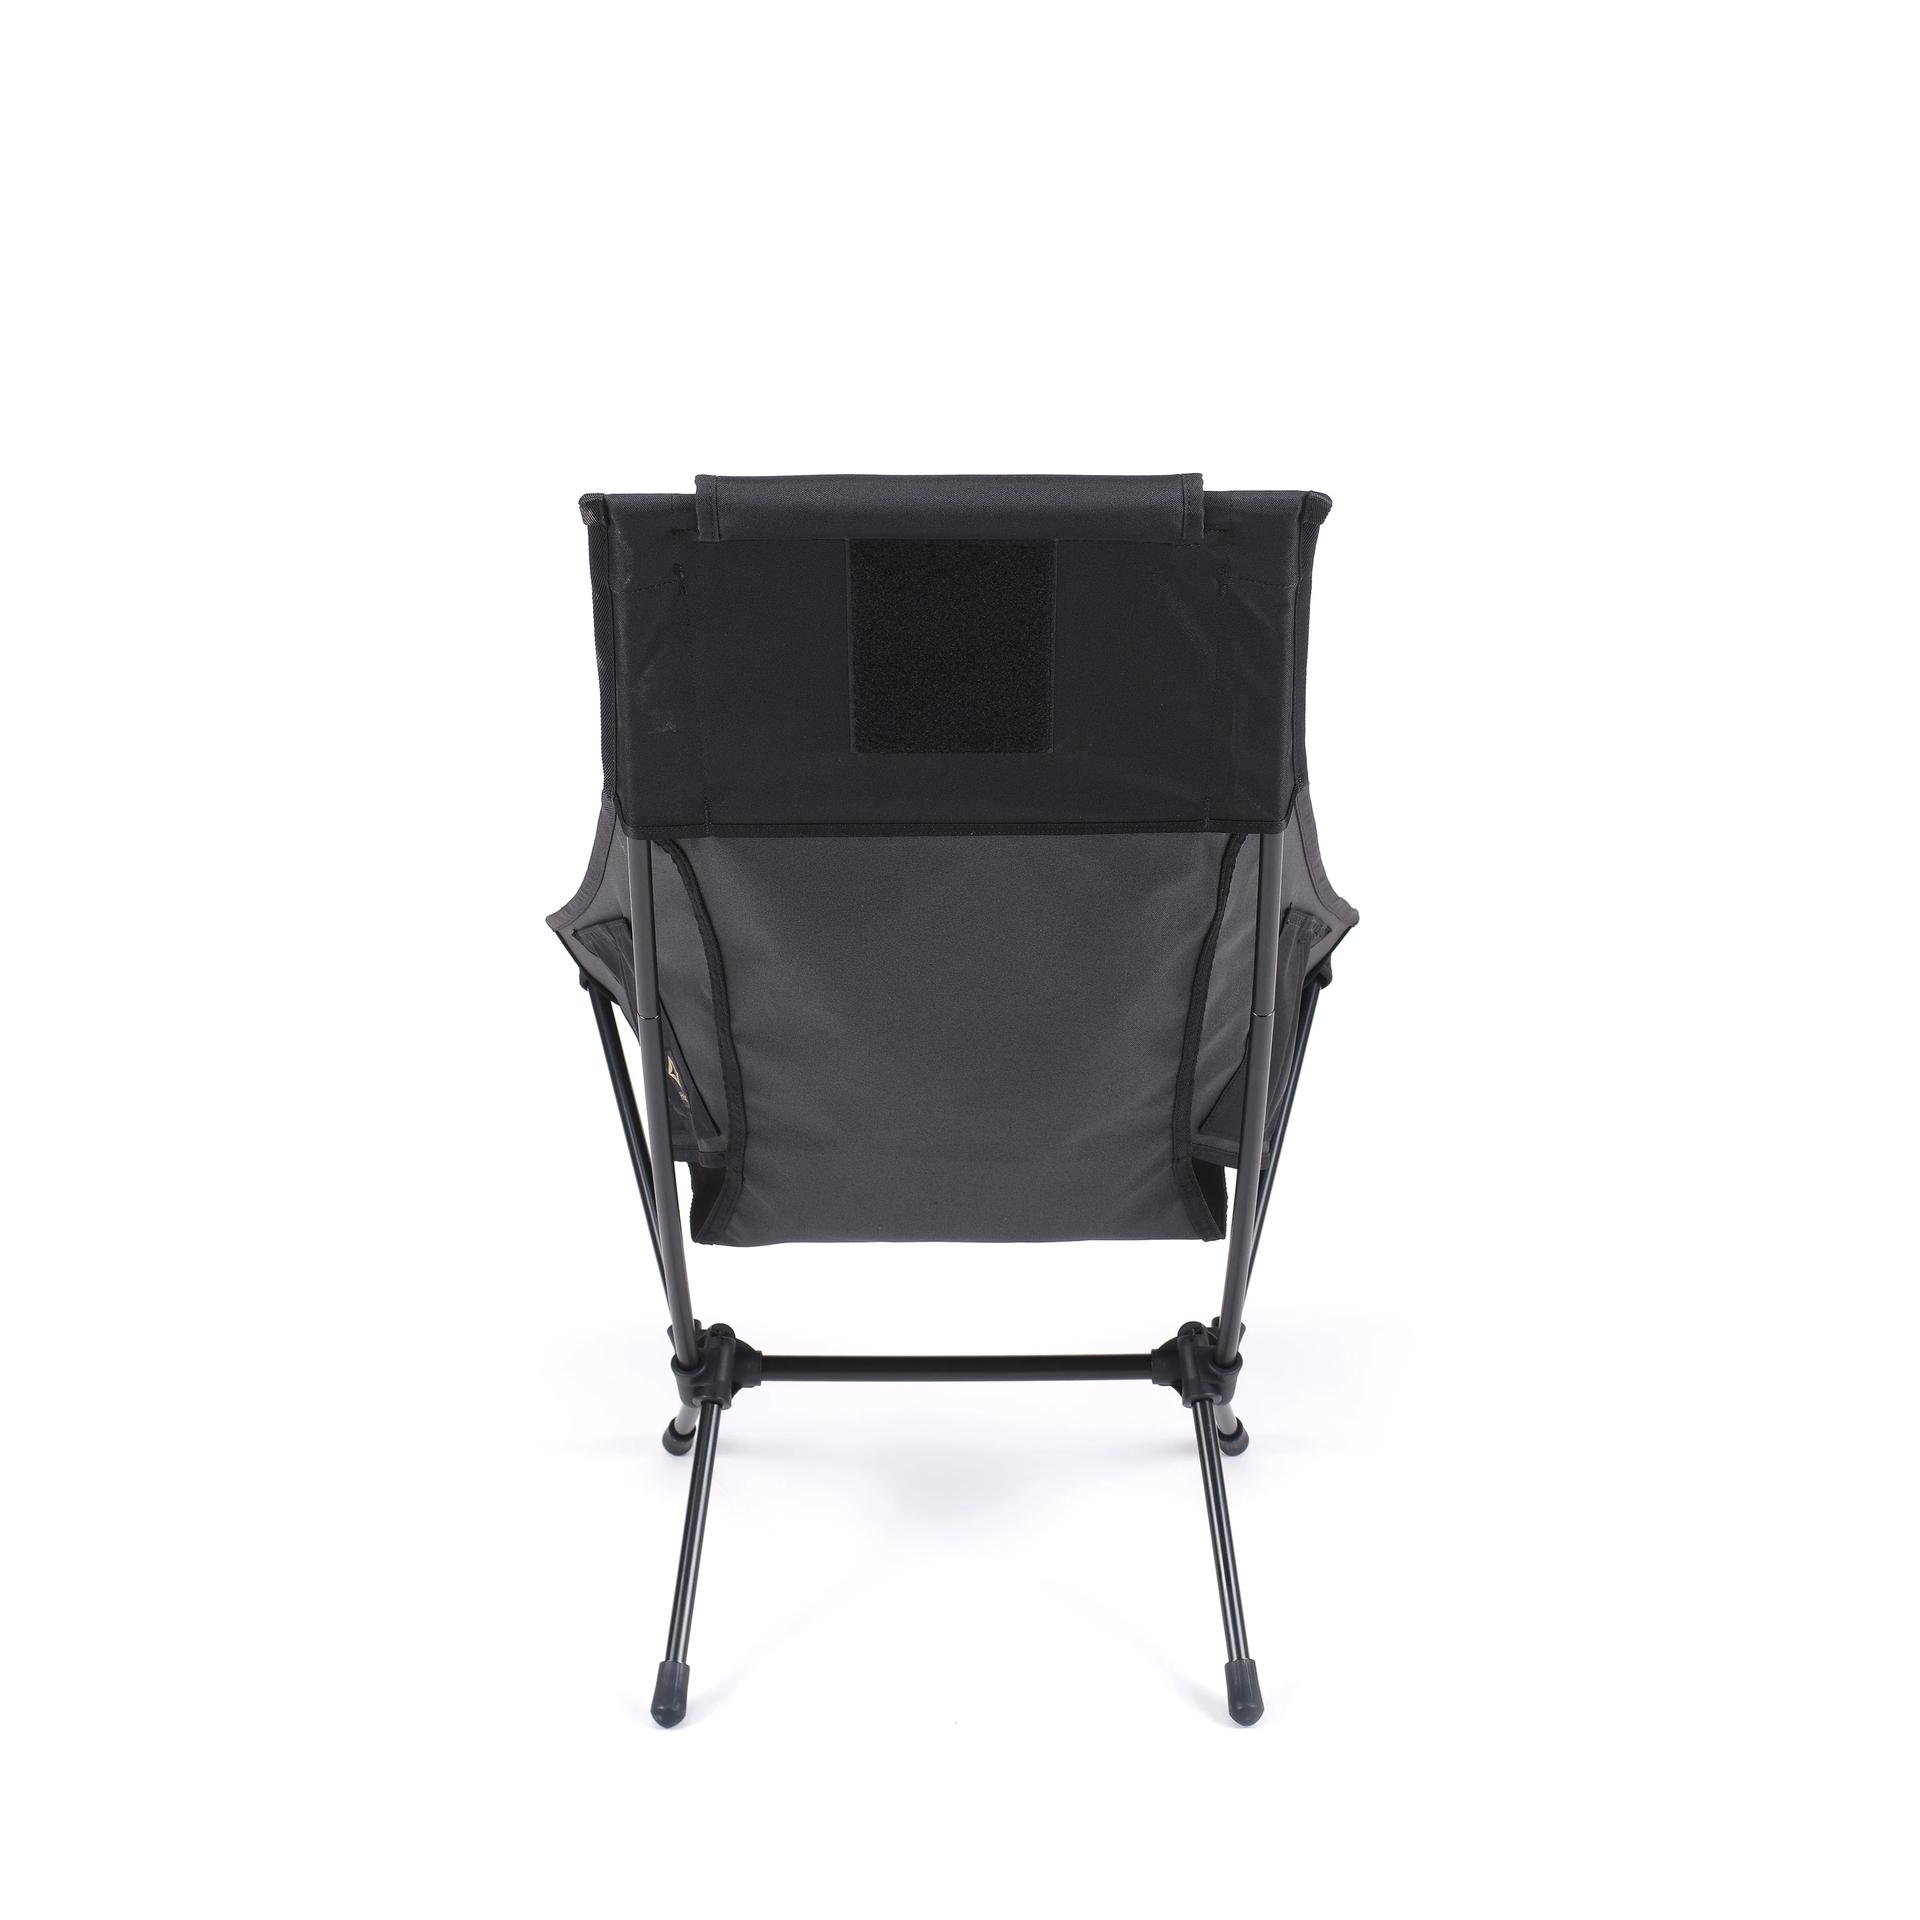 Helinox Tactical Chair Two